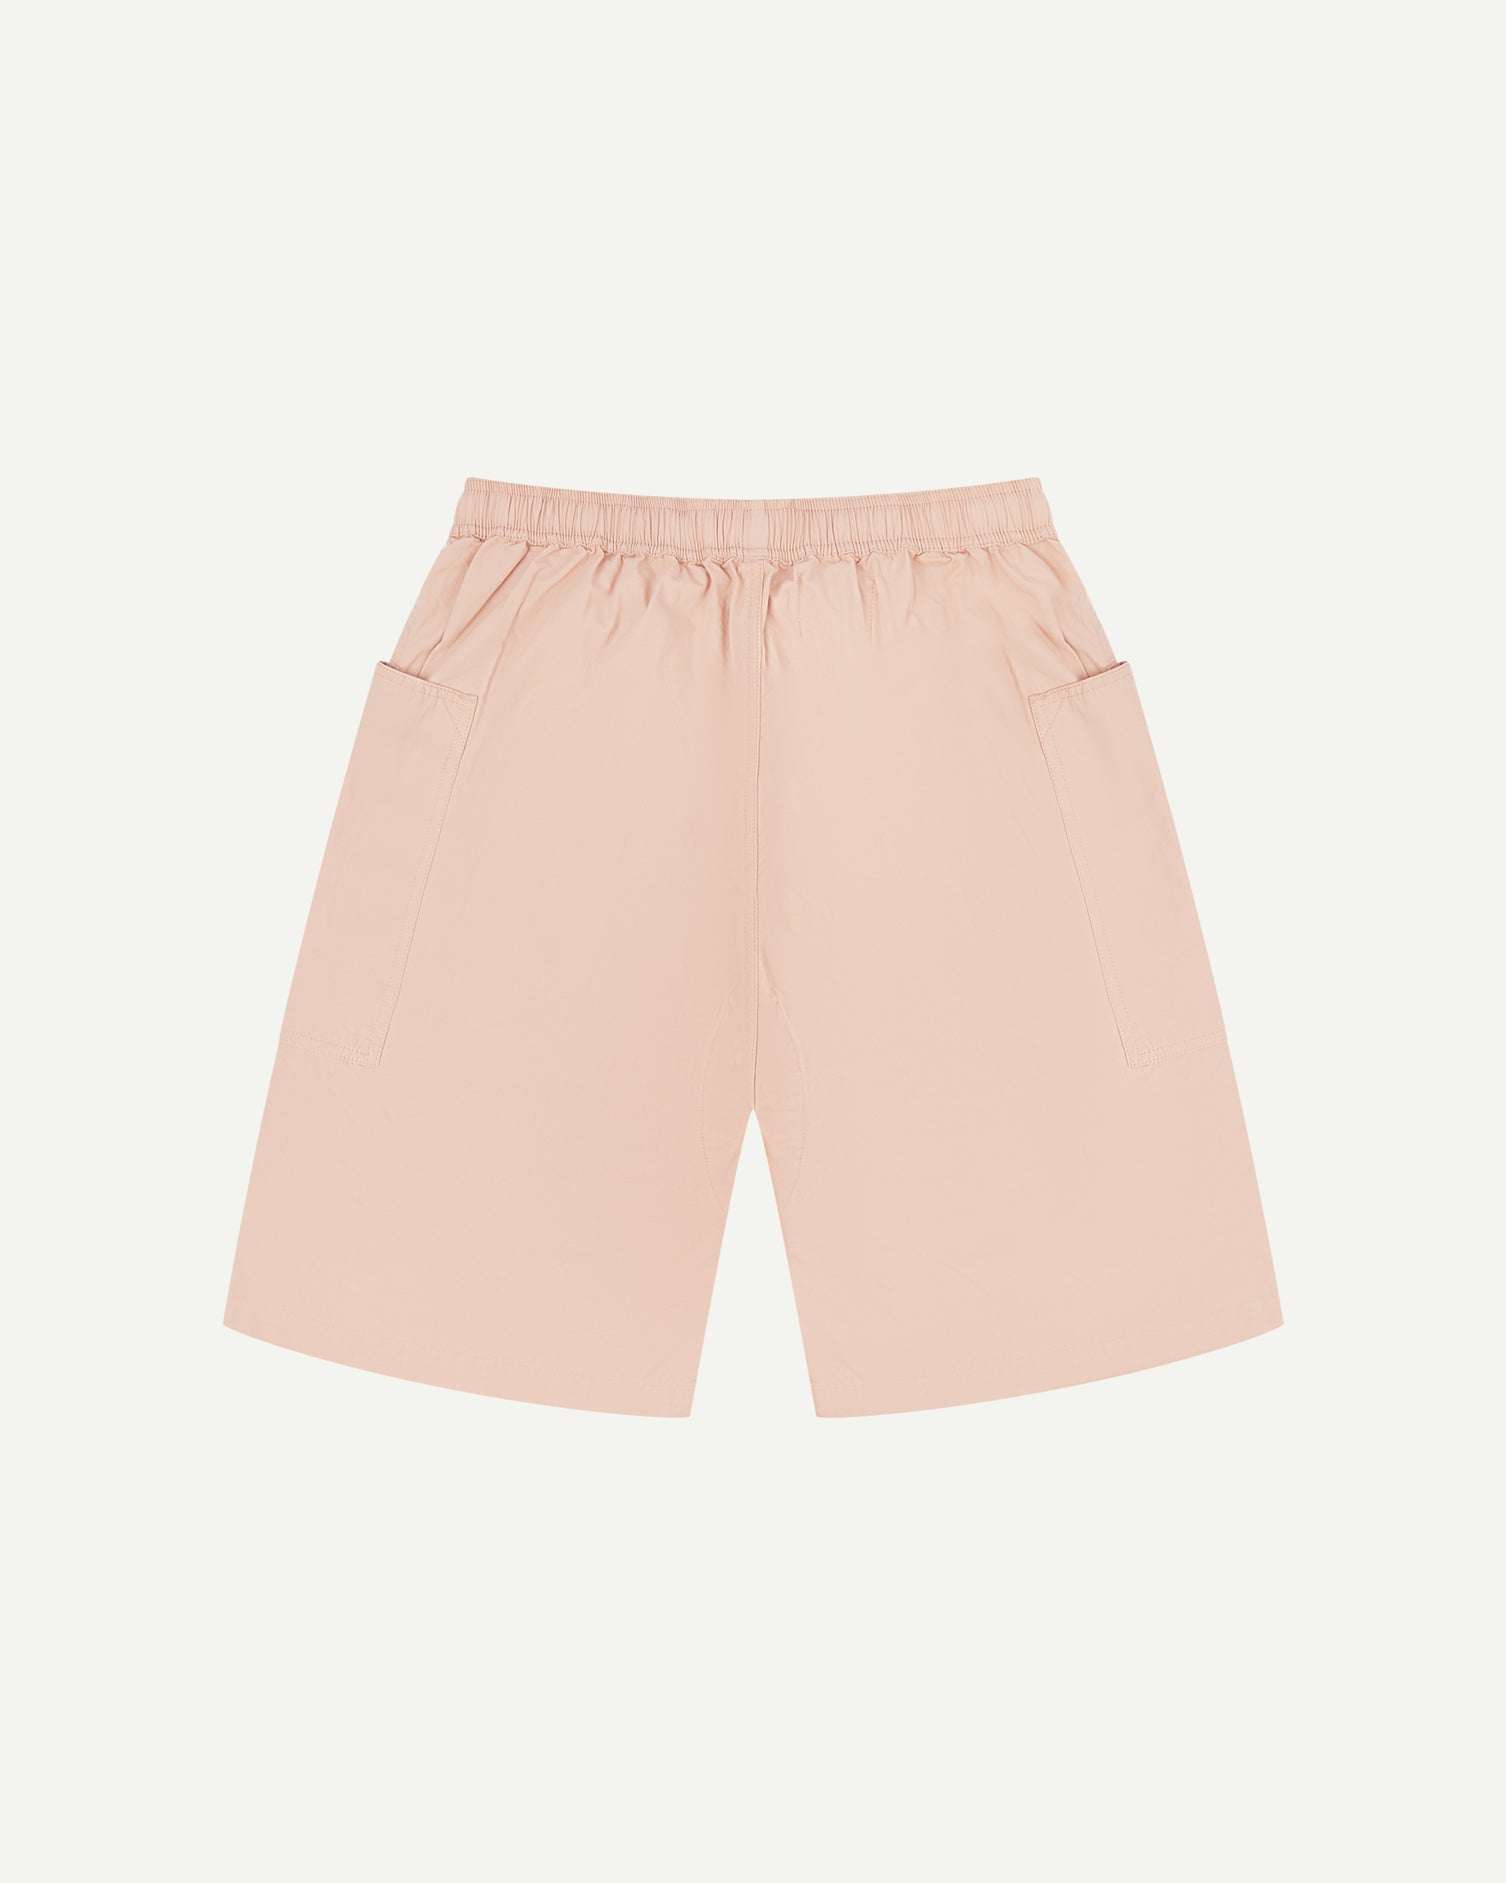 Back view of dusty pink organic cotton #5015 lightweight cotton shorts by Uskees. Clear view of elasticated waist .